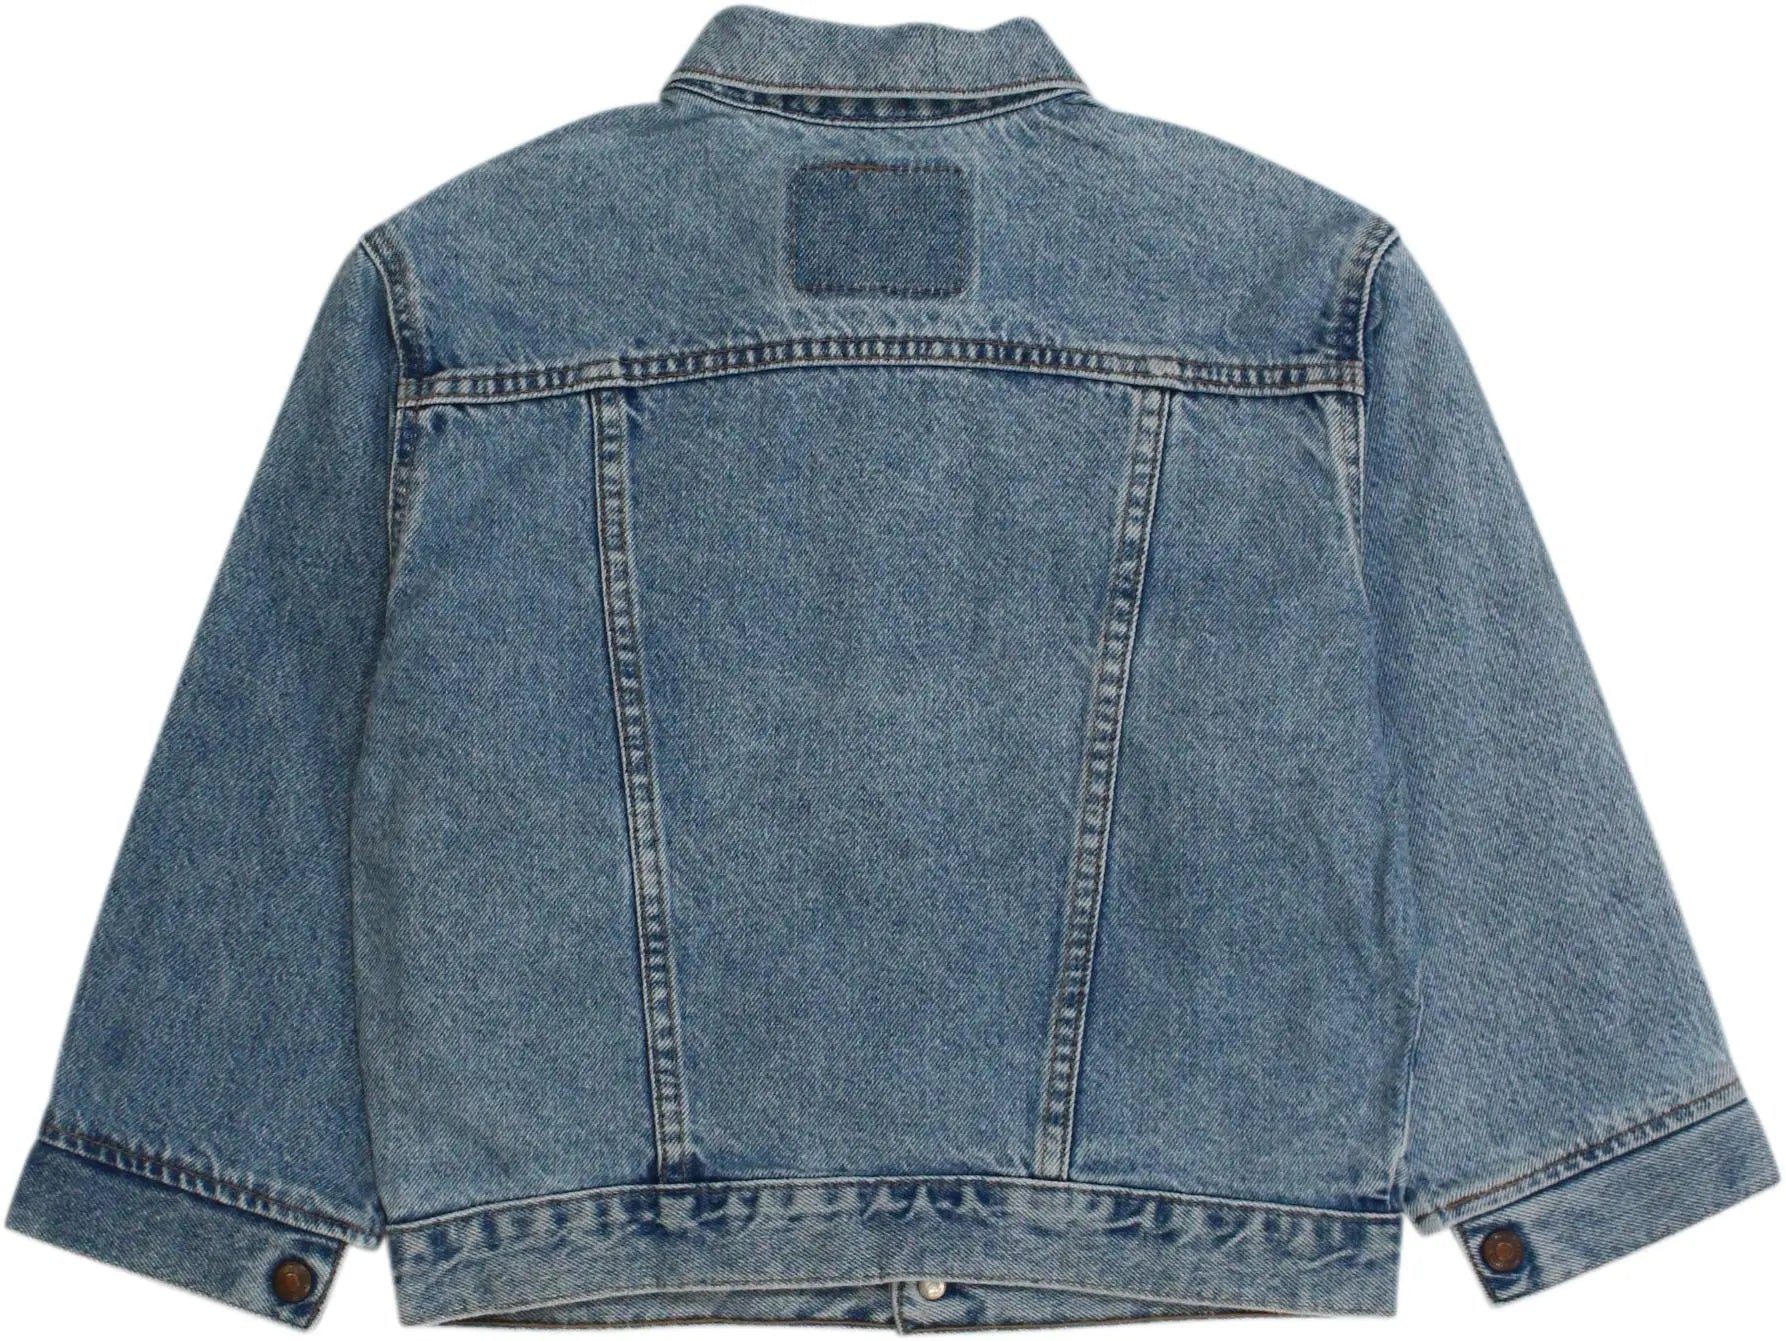 Levi's - Denim Jacket by Levi's- ThriftTale.com - Vintage and second handclothing